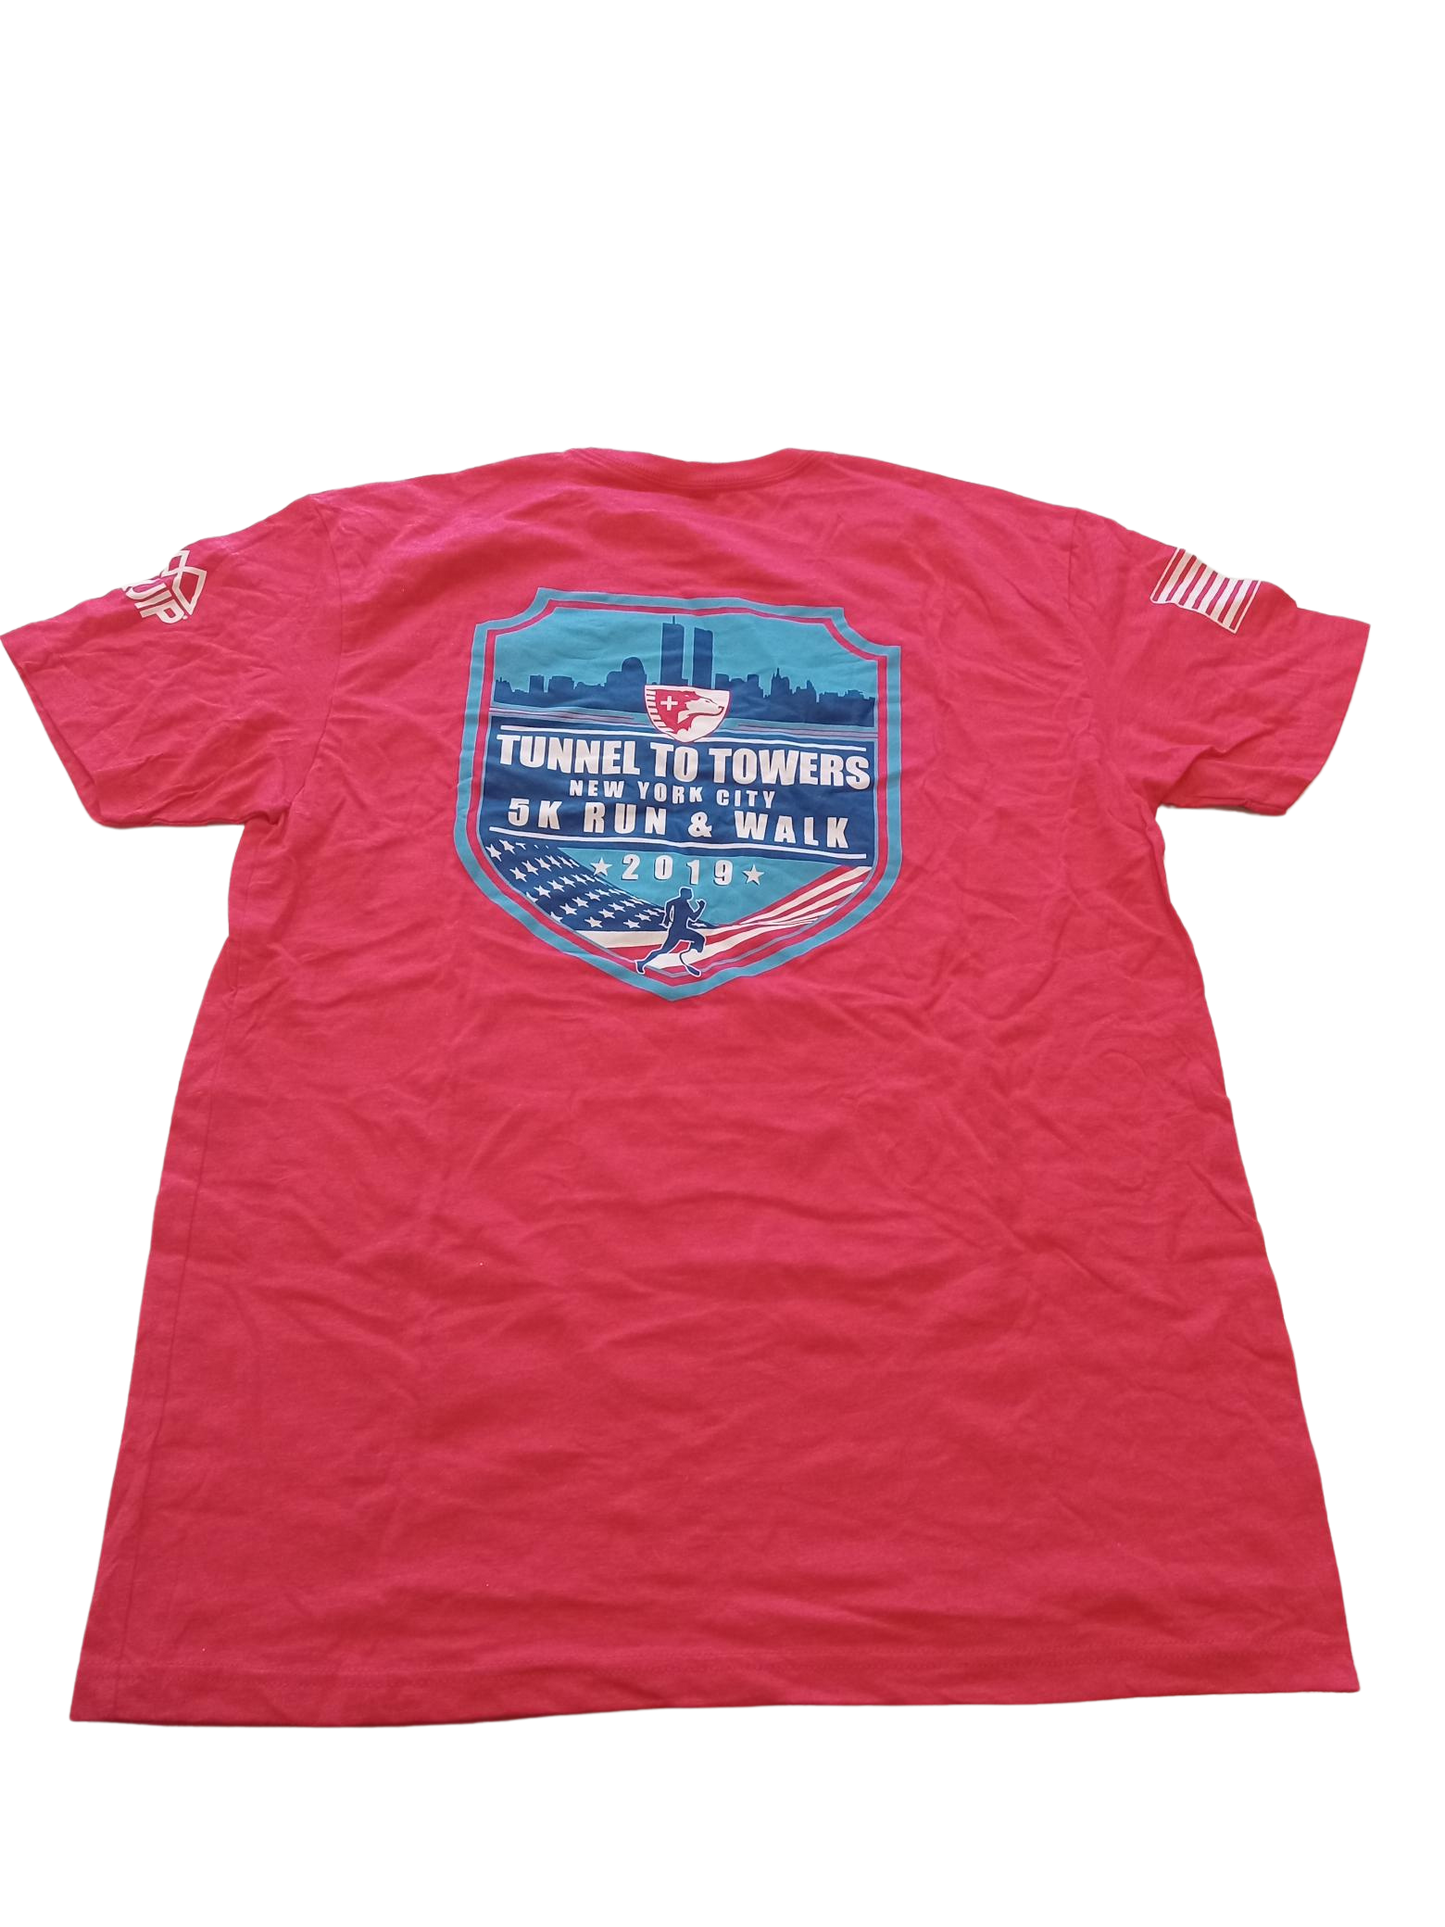 2019 Tunnels to Towers T-shirt